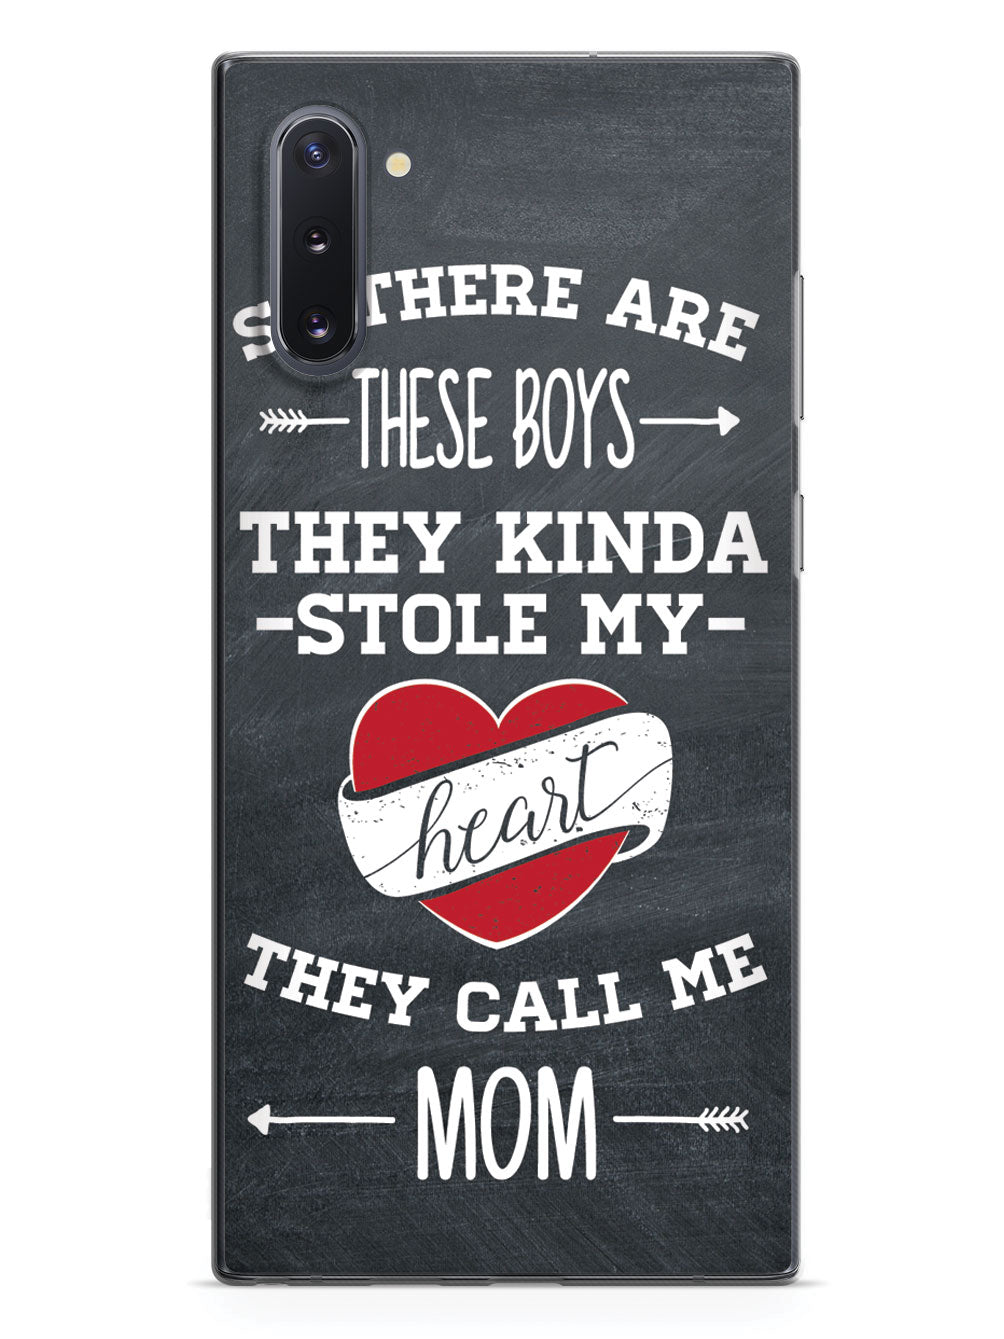 So There Are These Boys - Mom Case